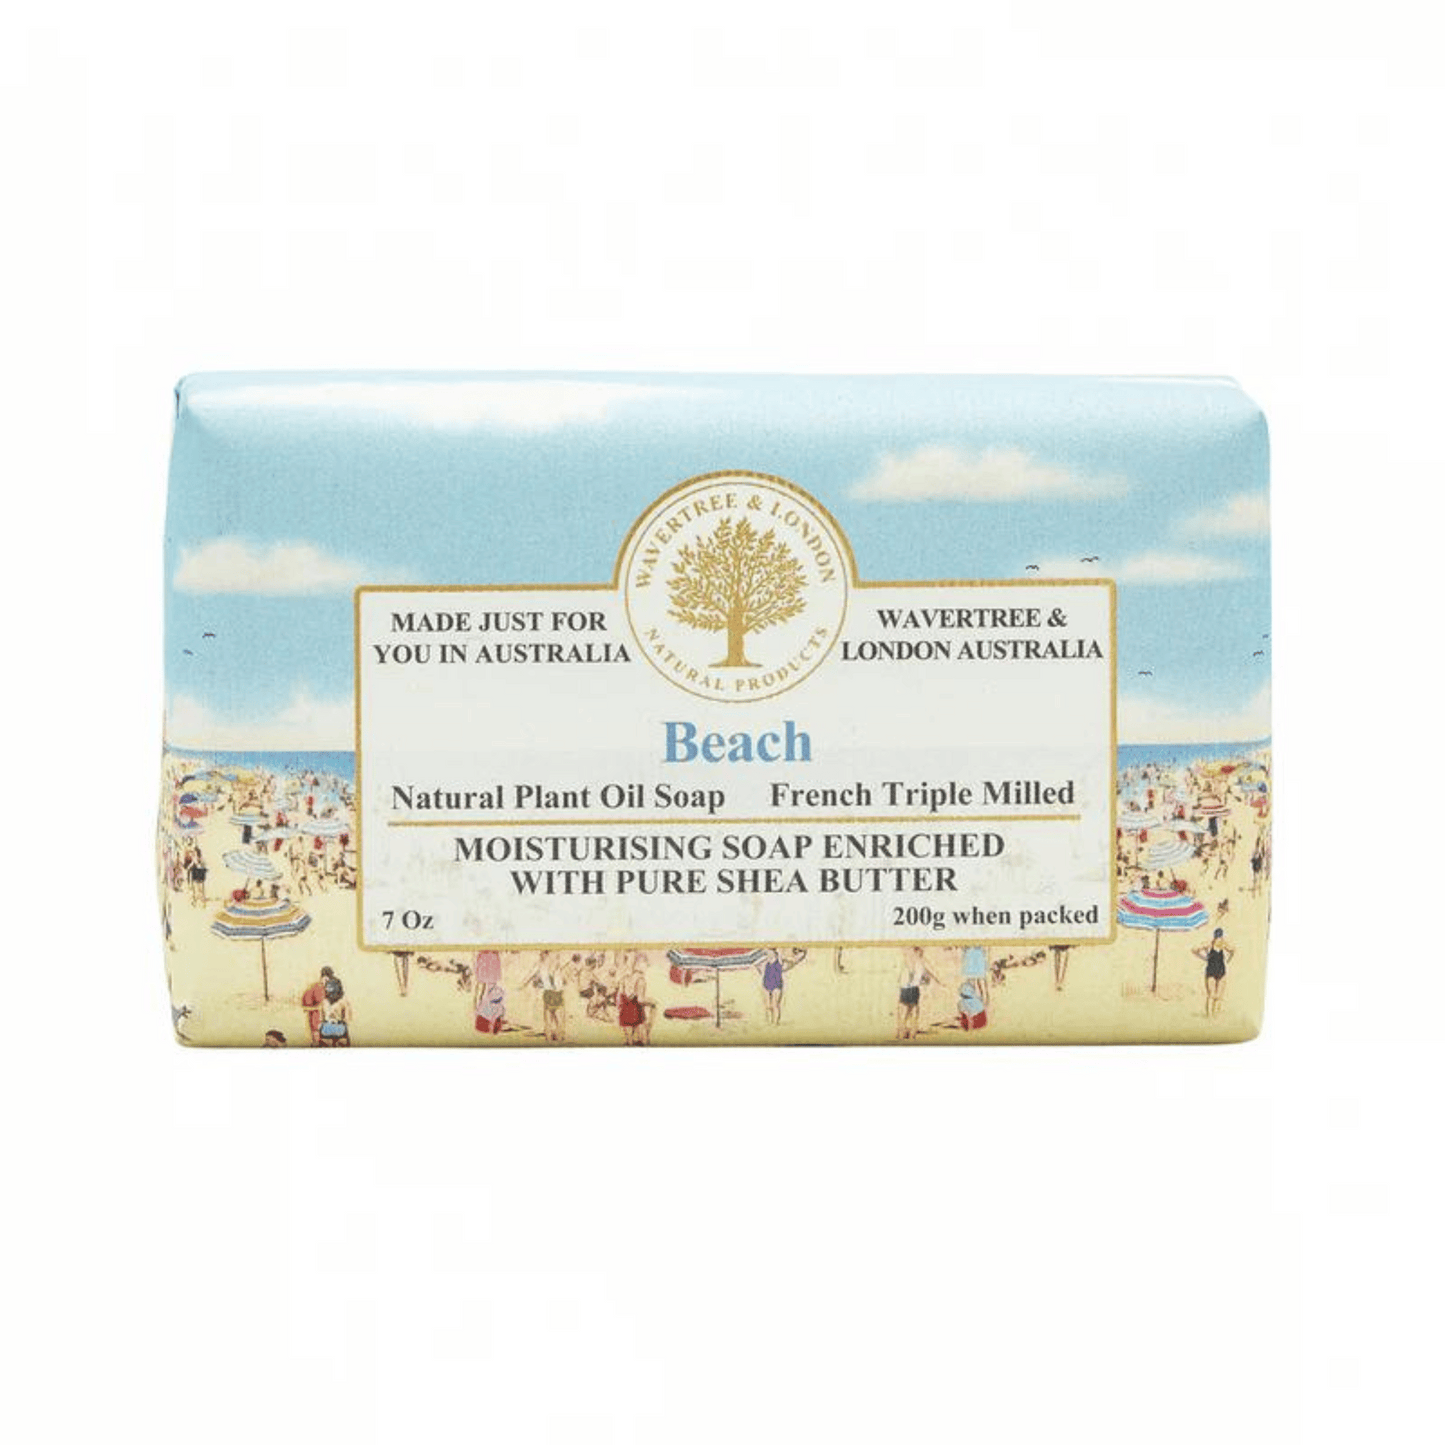 Primary Image of Beach Soap Bar